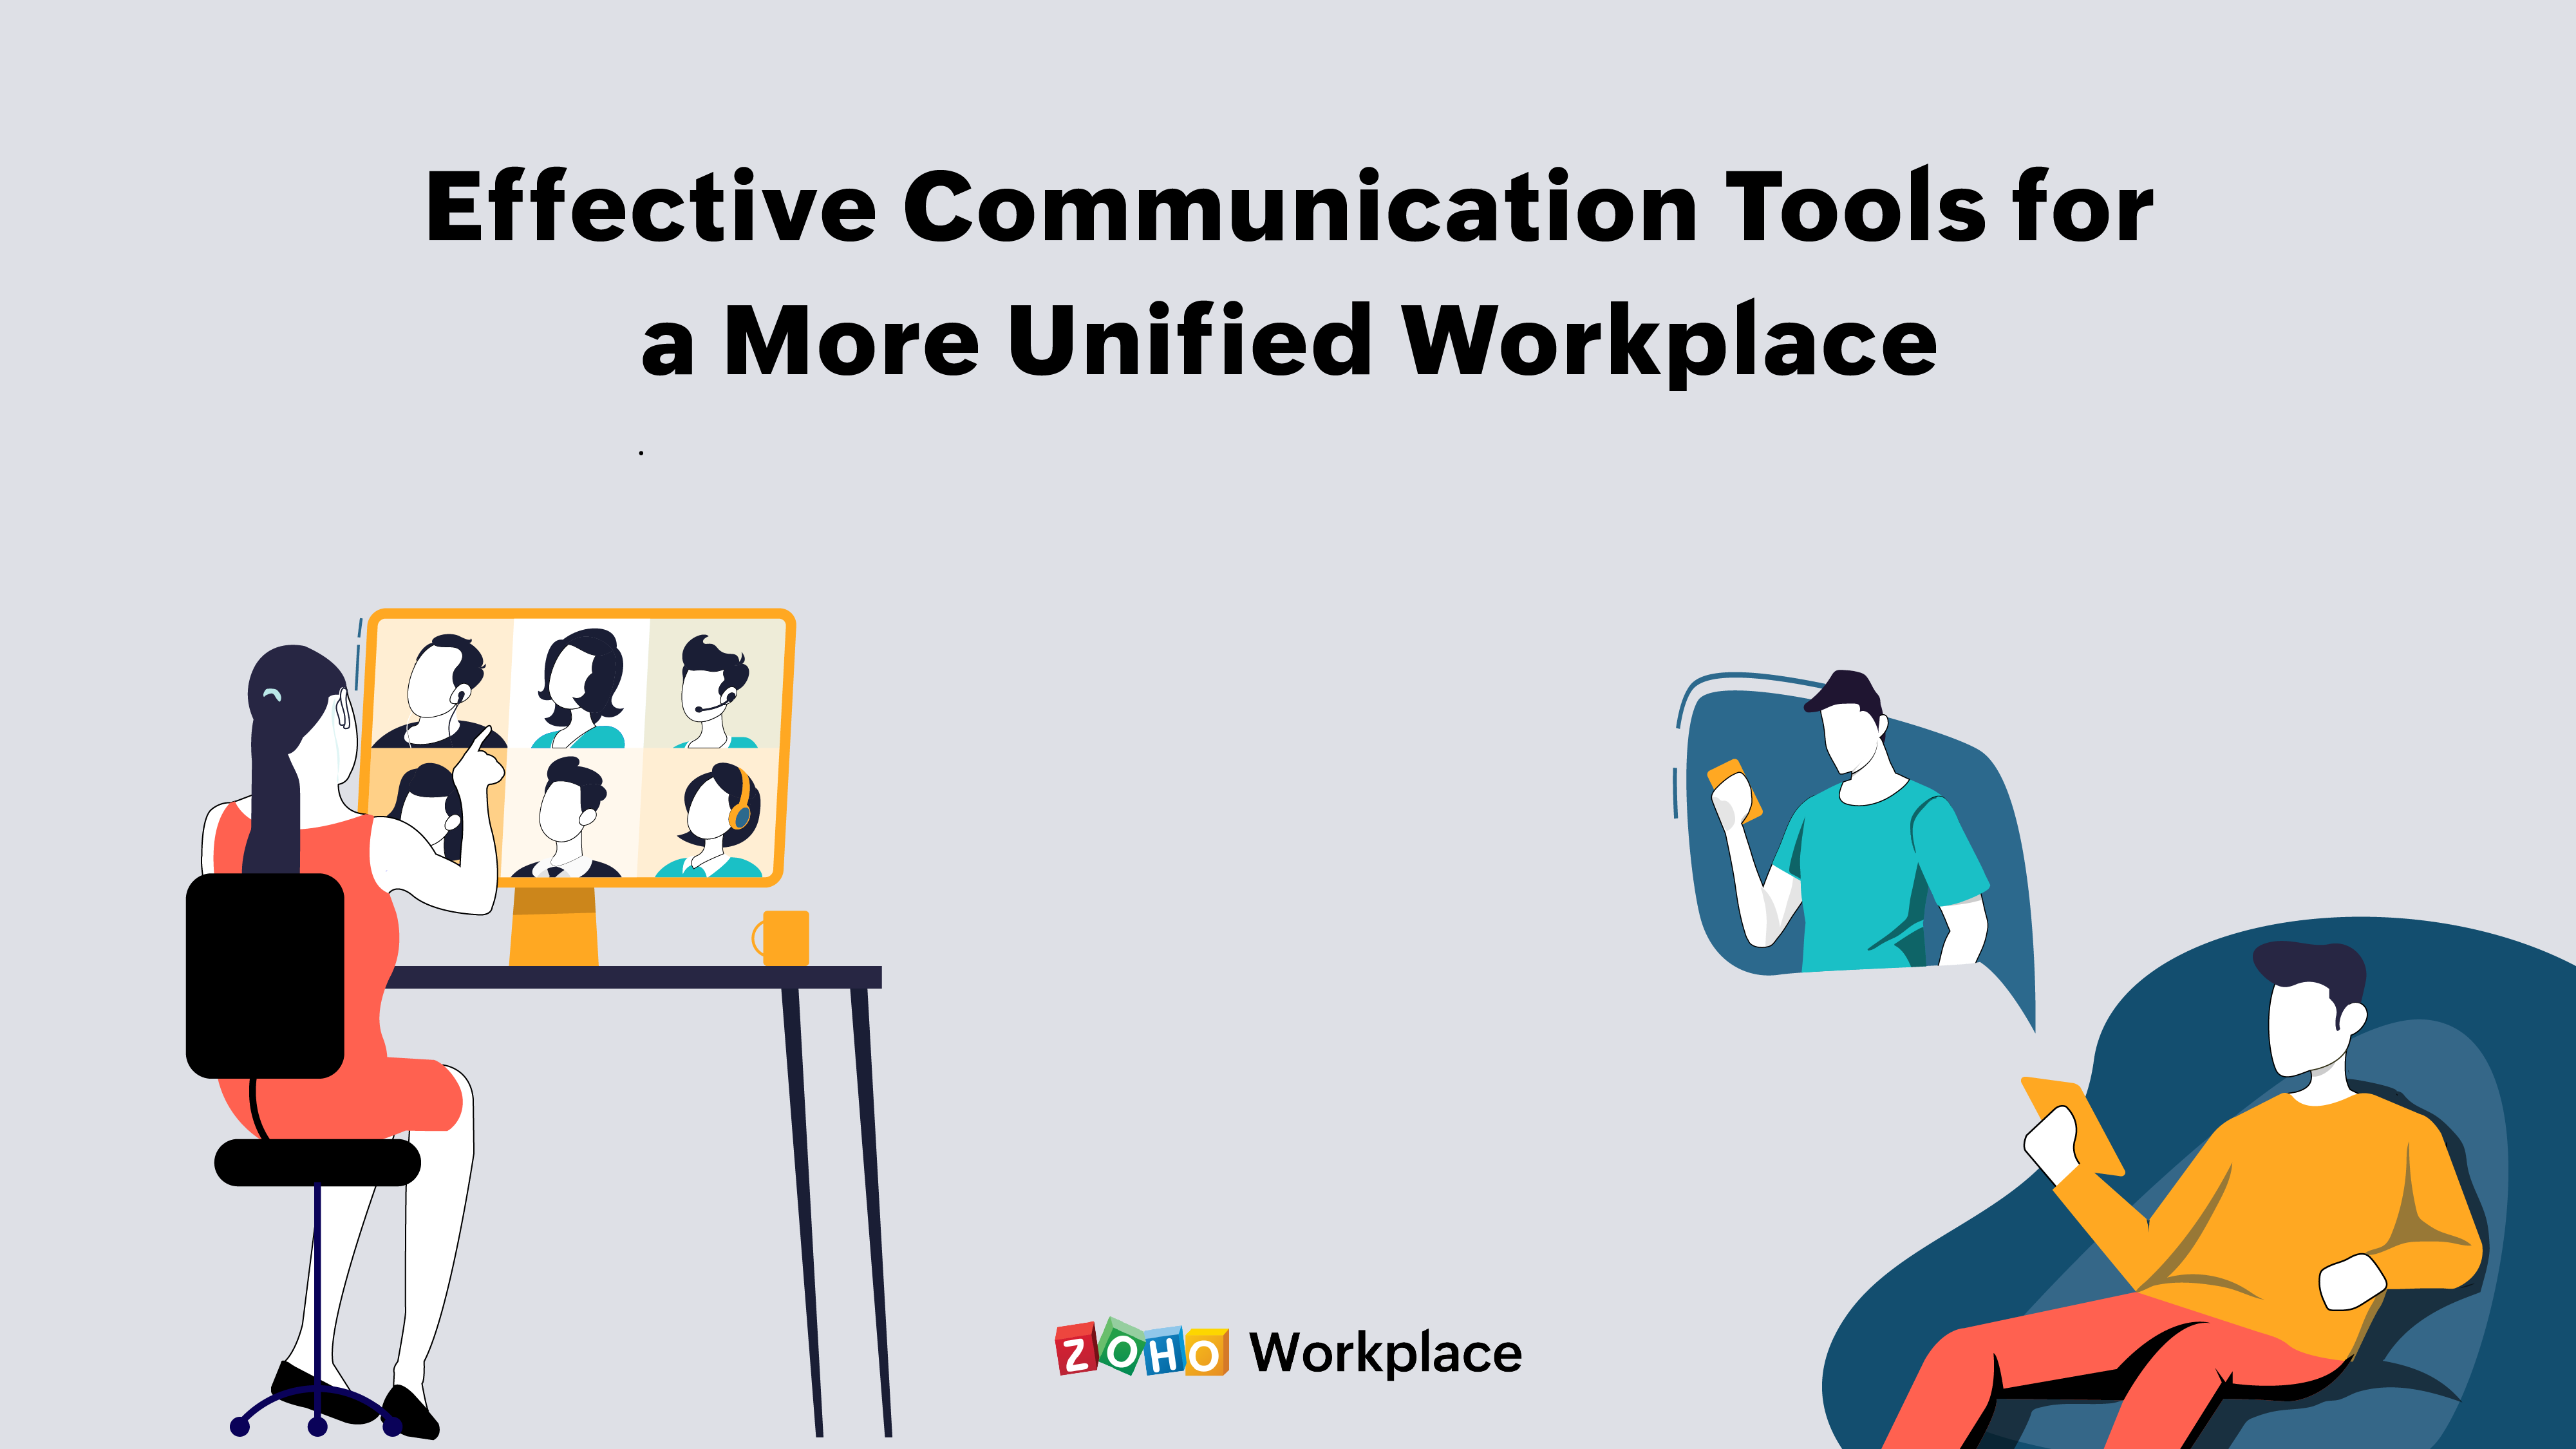 Effective communication tools for a more unified workplace